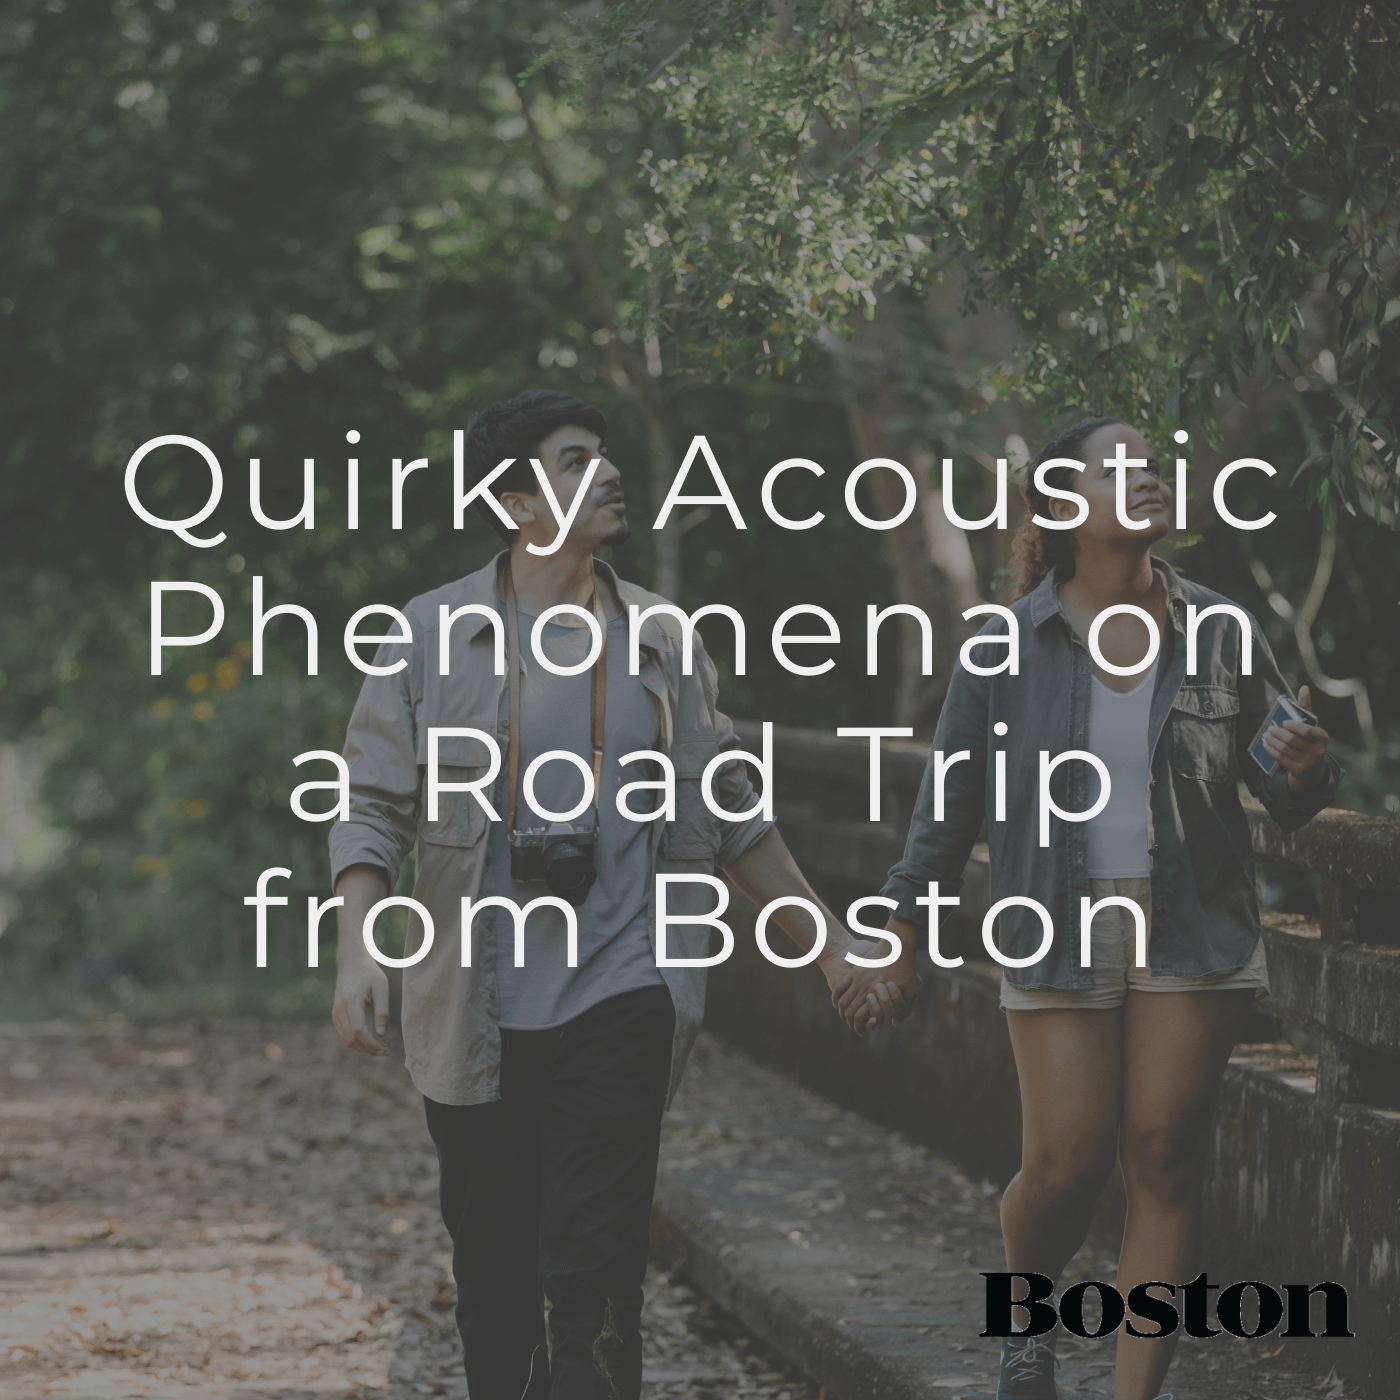 Quirky Acoustic Phenomena on a Road Trip from Boston